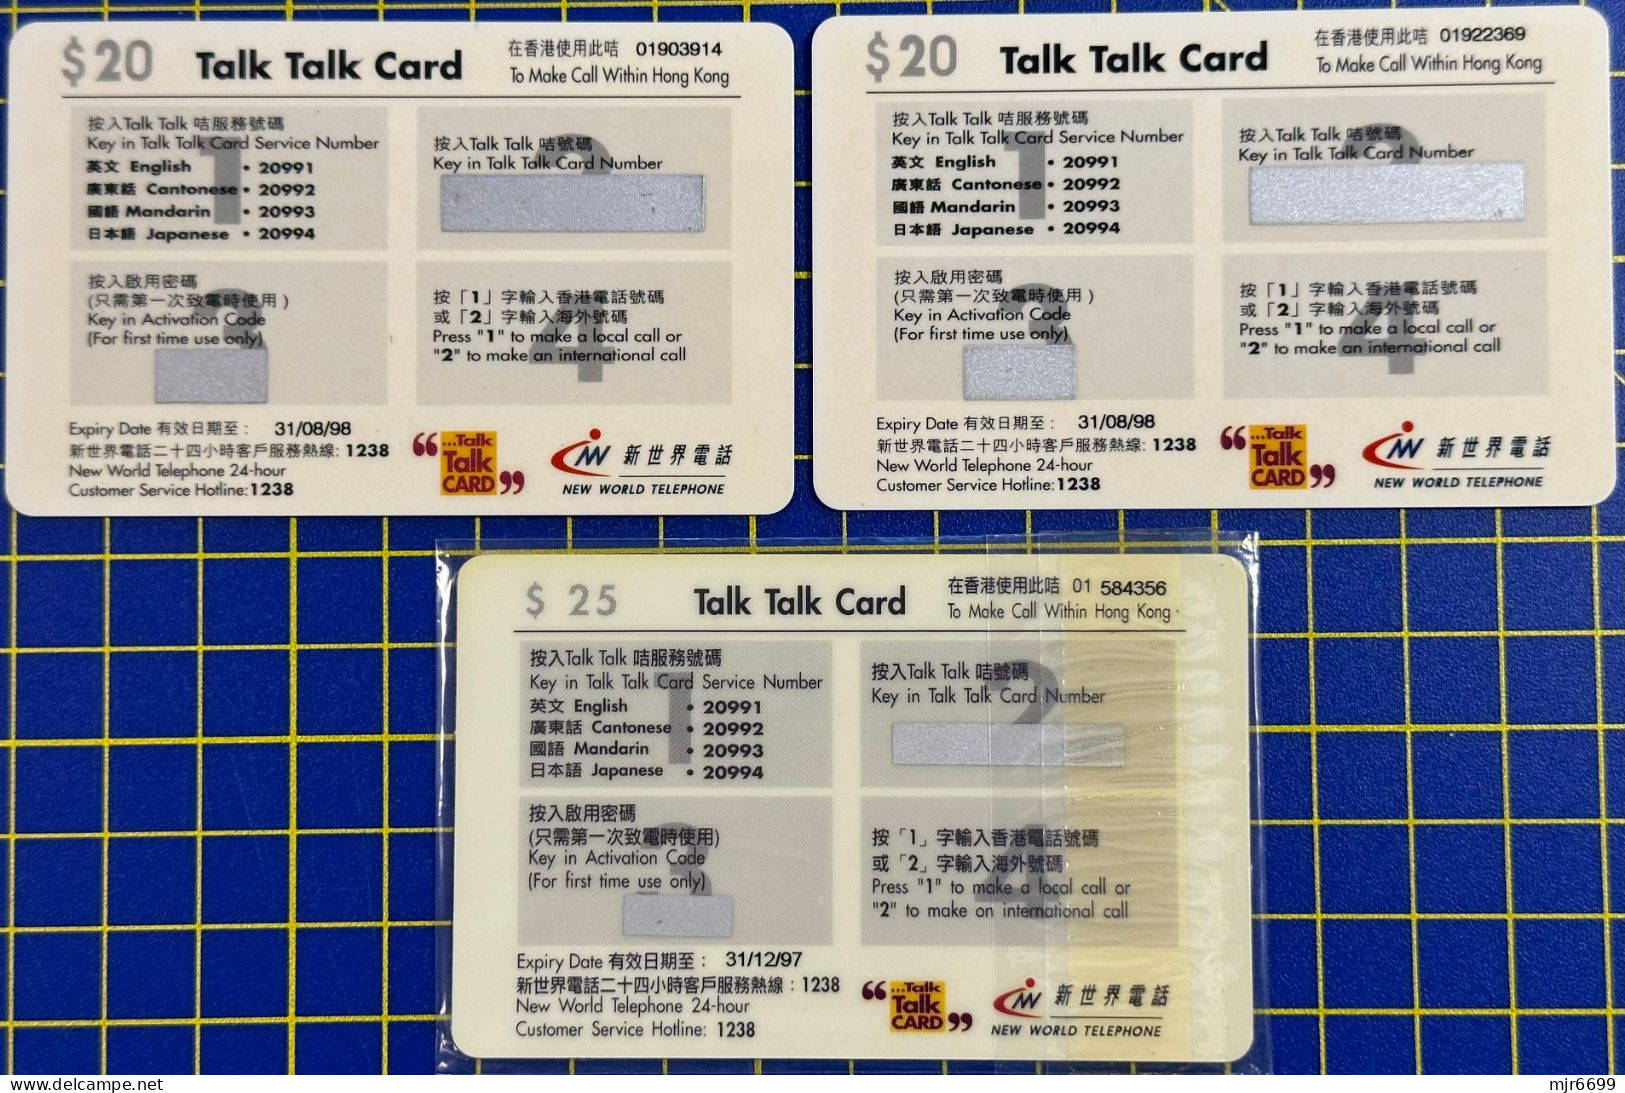 1997\98 LOT OF 3 UNUSED TALK TALK CARD, FROM NEW WORLD TELEPHONE, VERY FINE AND CLEAN - Hong Kong